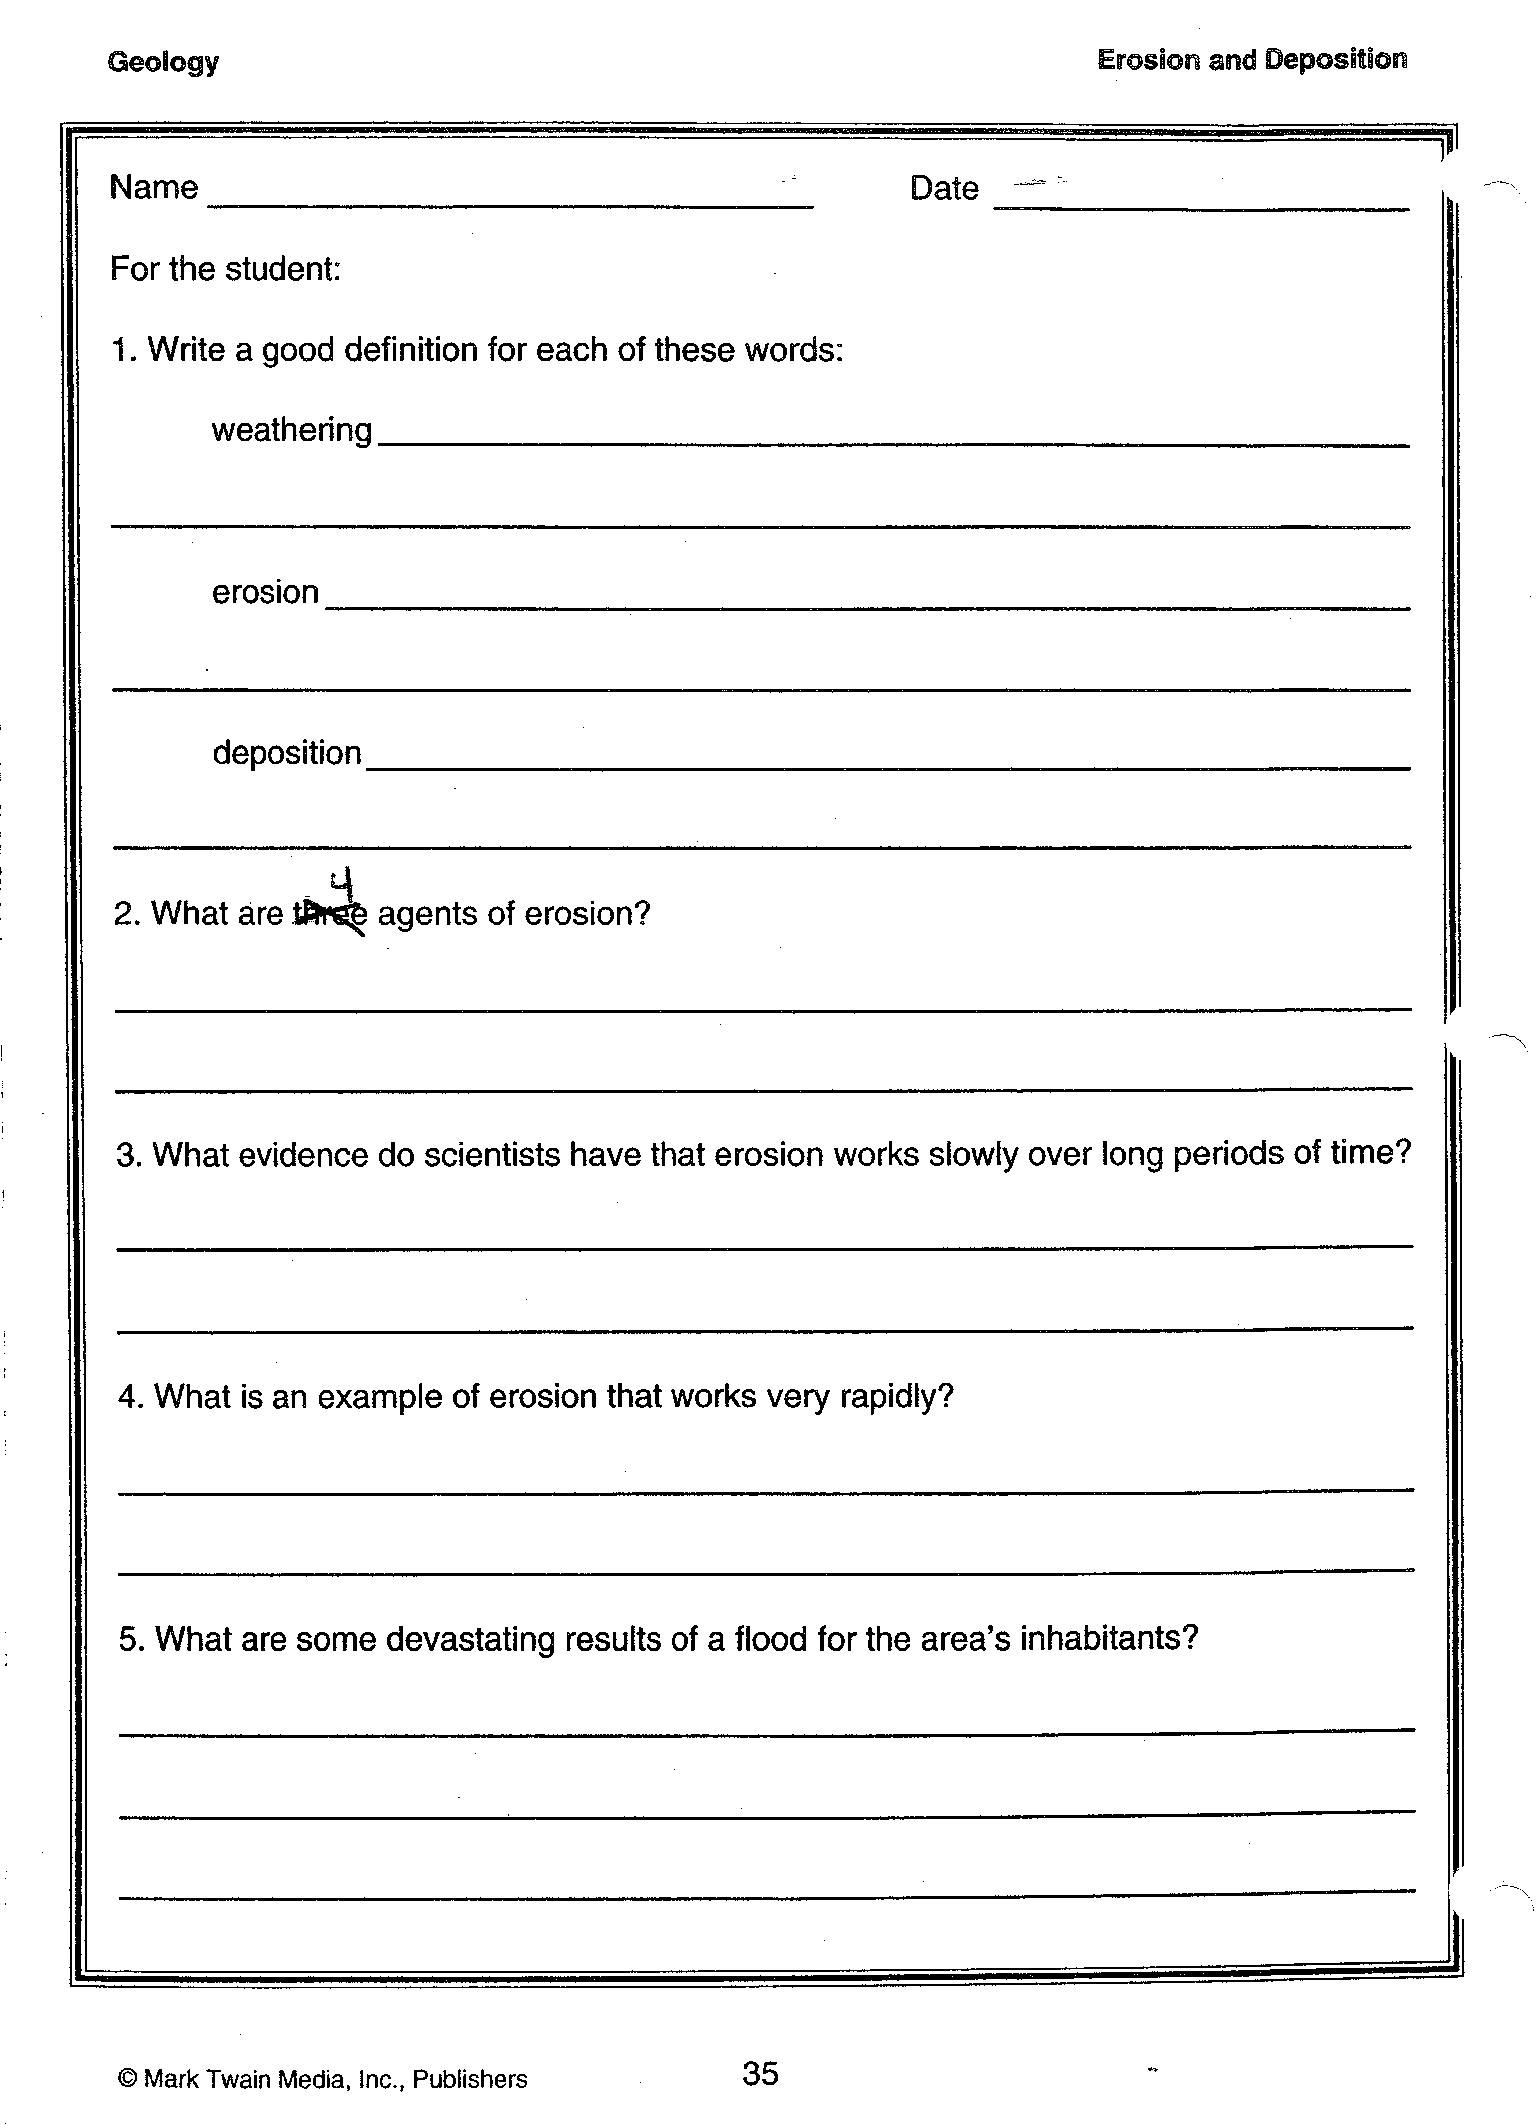 Erosion and Deposition Worksheet Erosion and Deposition Definitions 001 15362128